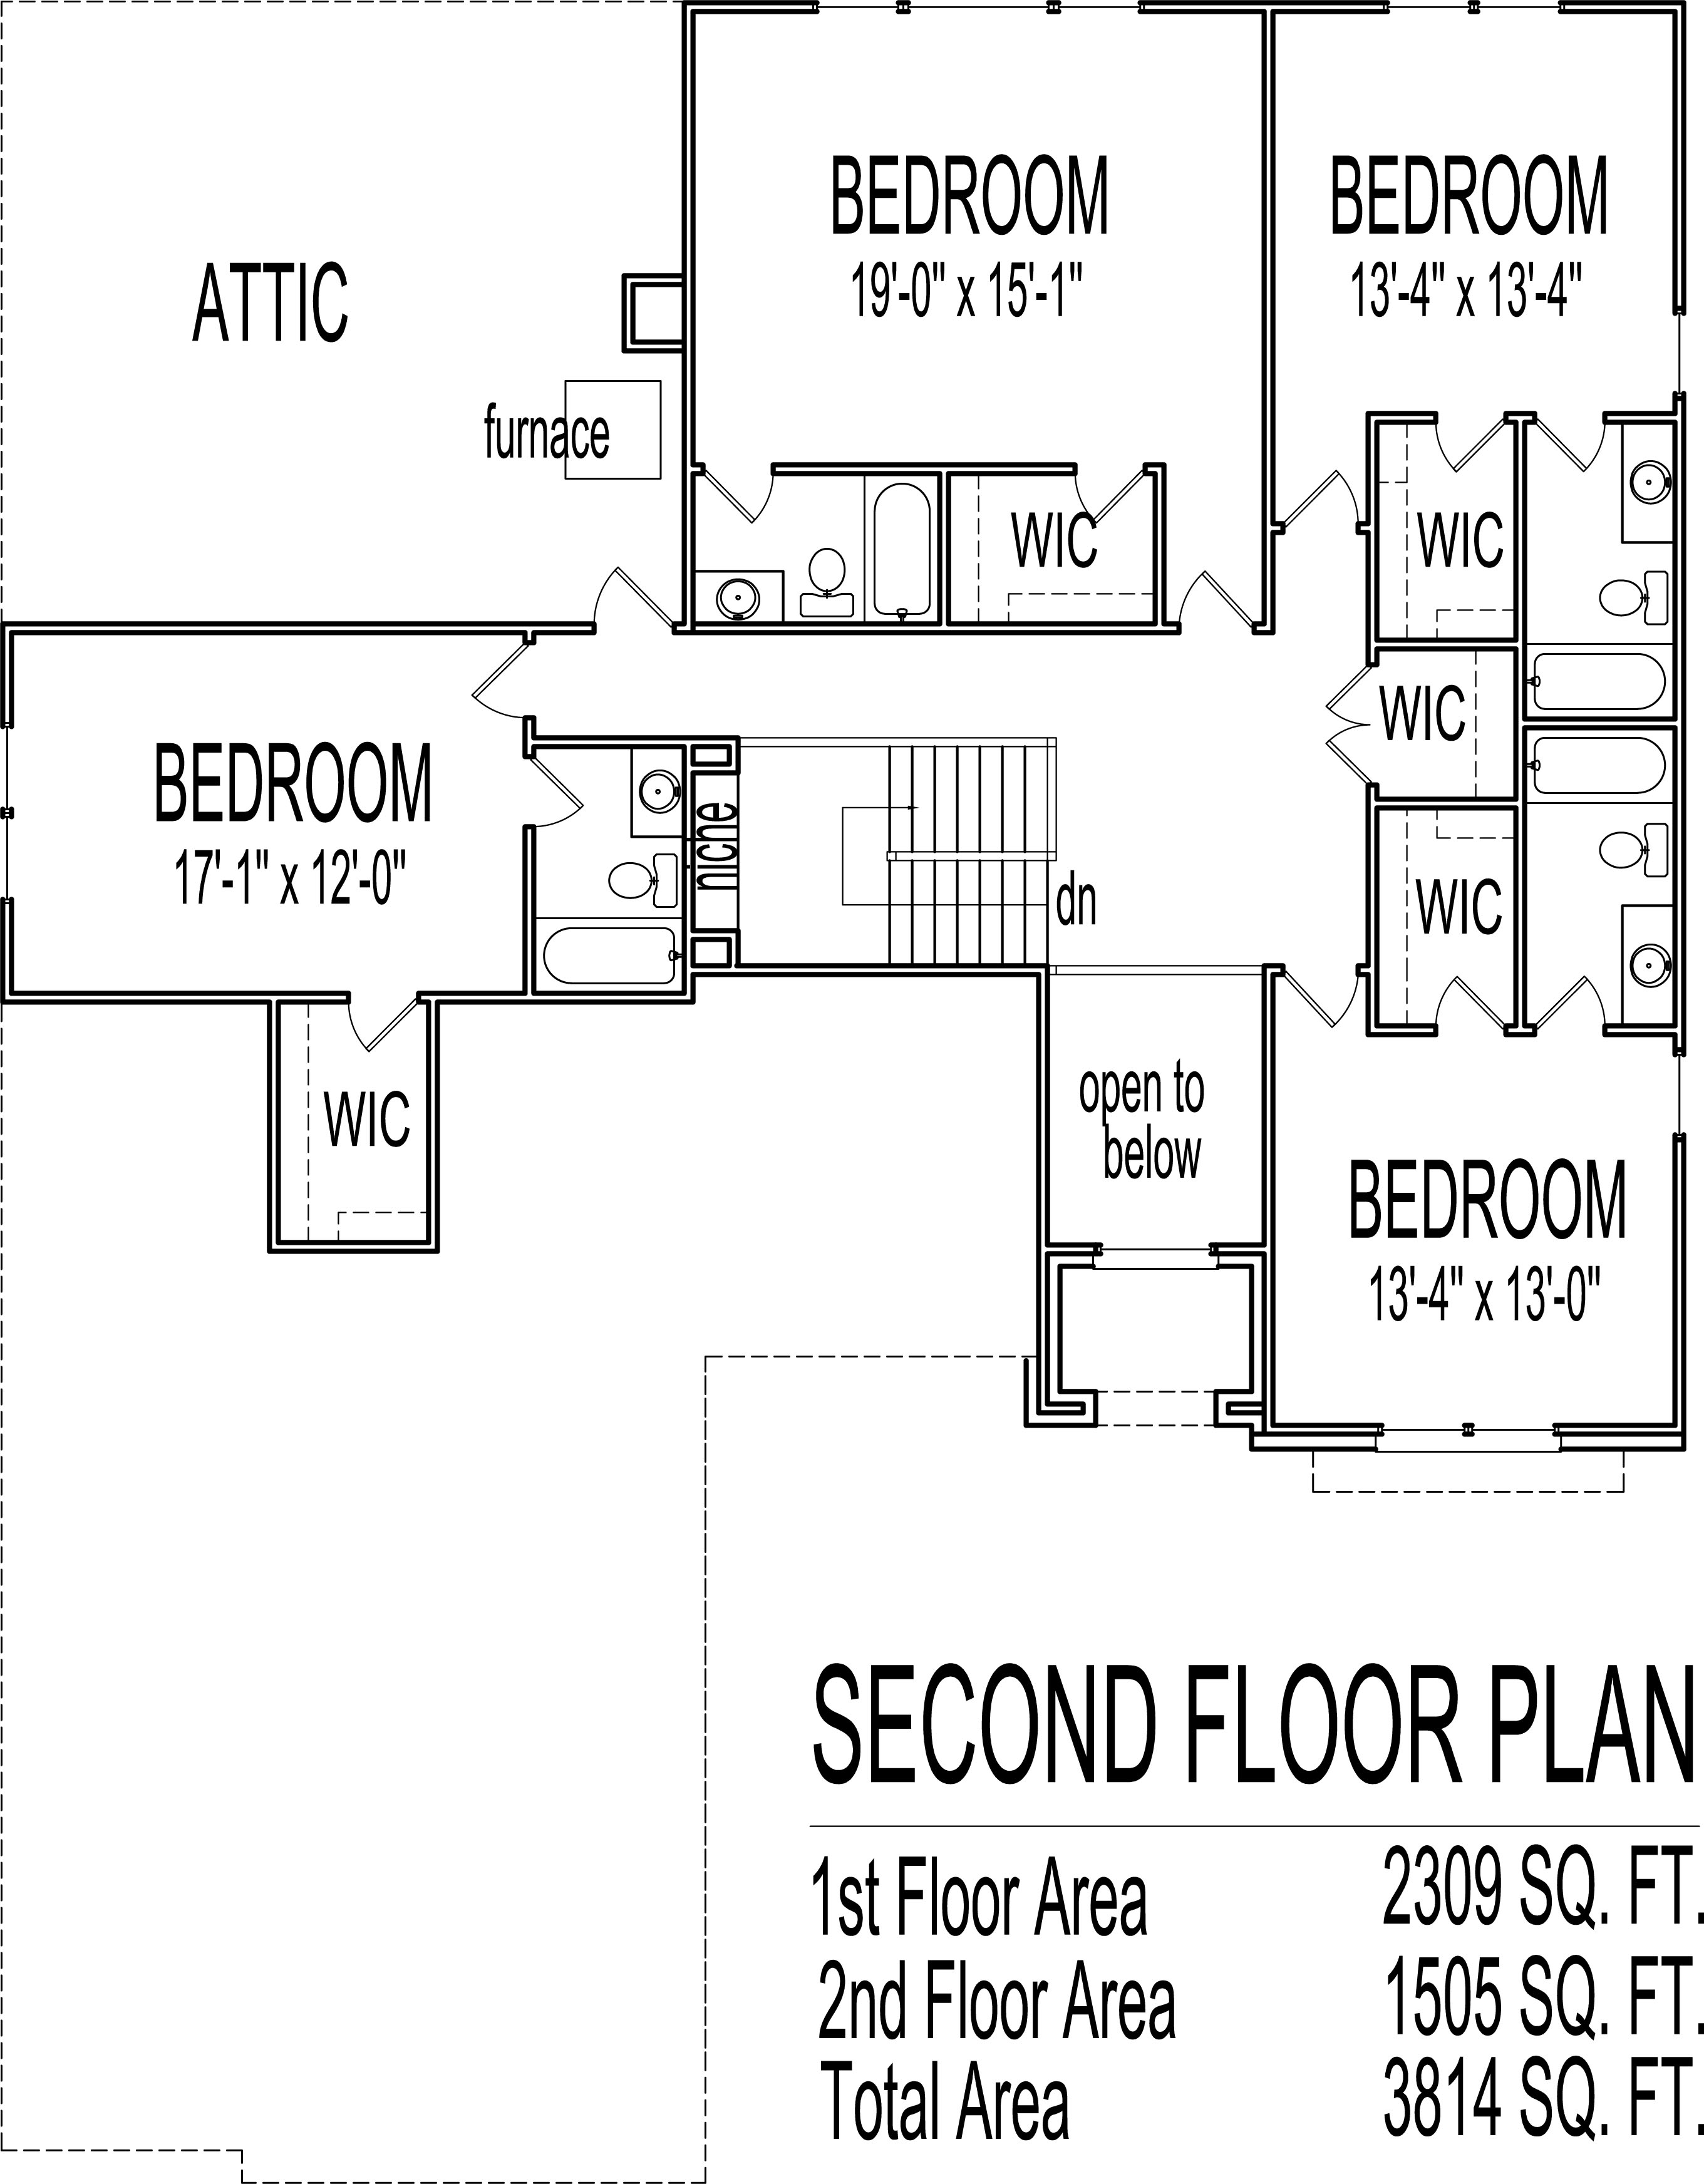 House Drawings 5 Bedroom 2 Story House Floor Plans With Basement